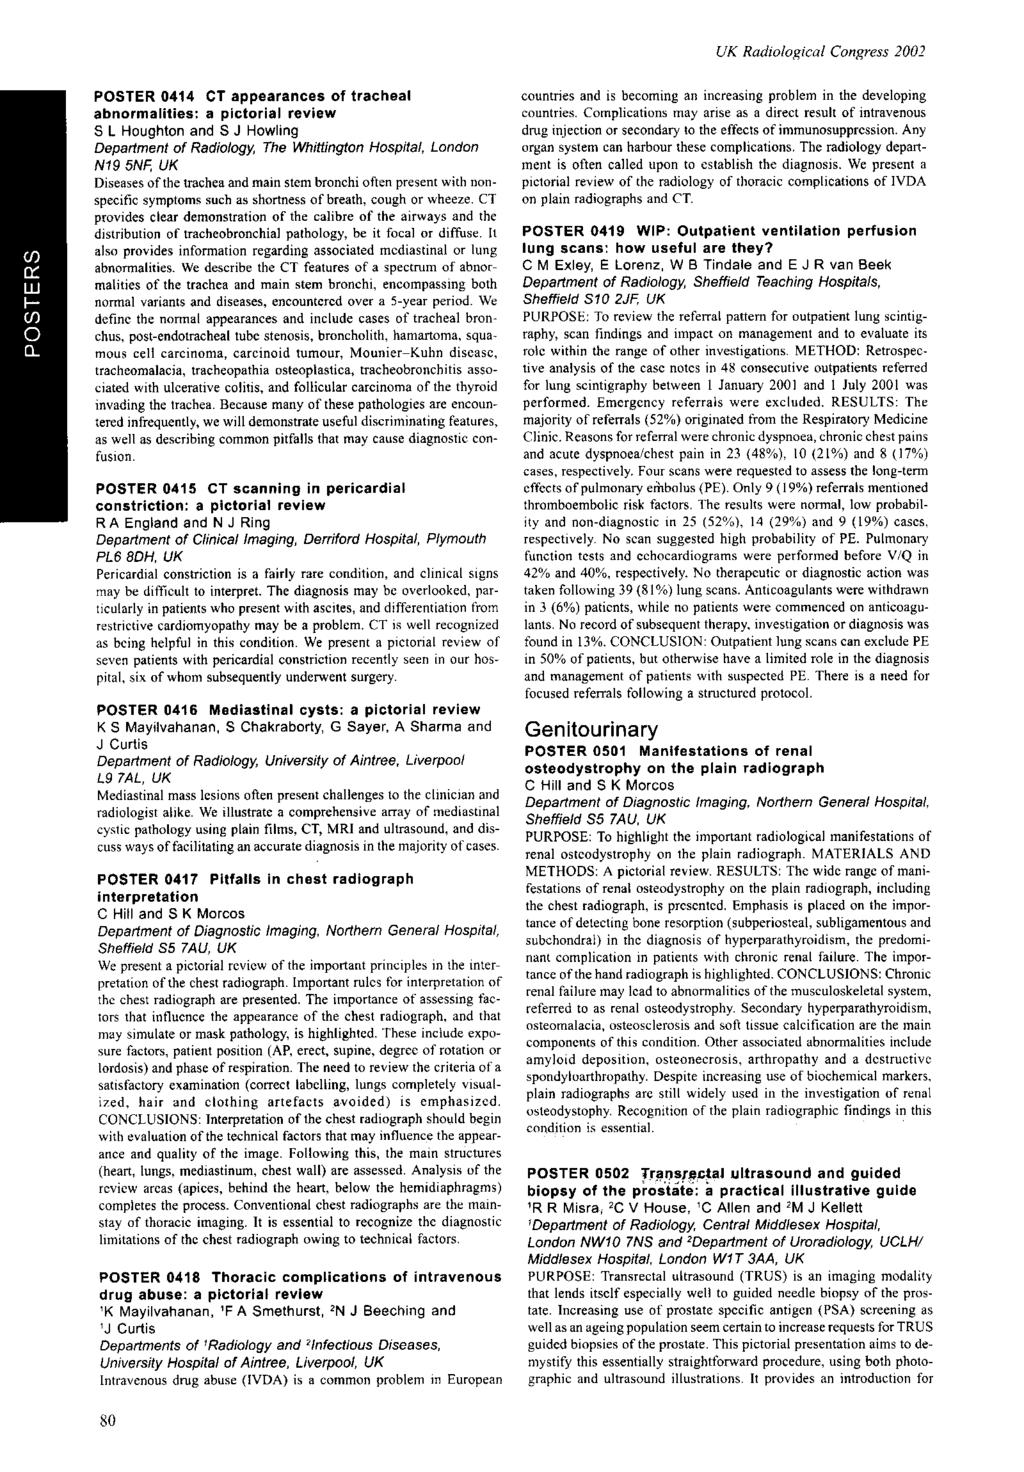 POSTER 044 CT appearances of tracheal abnormalities: a pictorial review S L Houghton and S J Howling Department of Radiology, The Whittington Hospital, London N9 5NF, UK Diseases of the trachea and